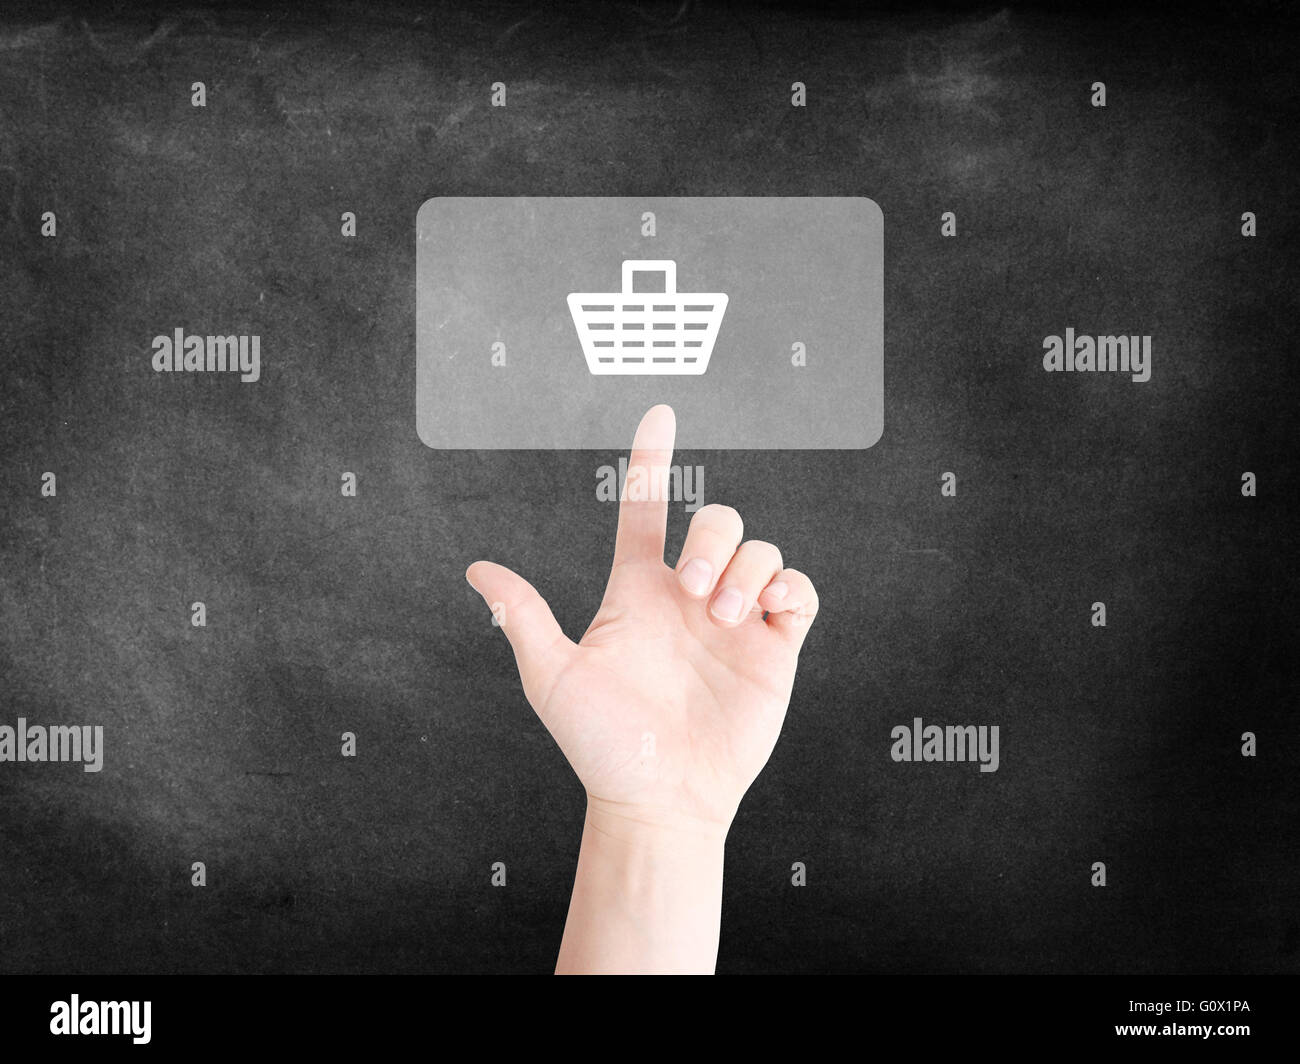 Finger tapping on an icon to symbolize Shopping Stock Photo